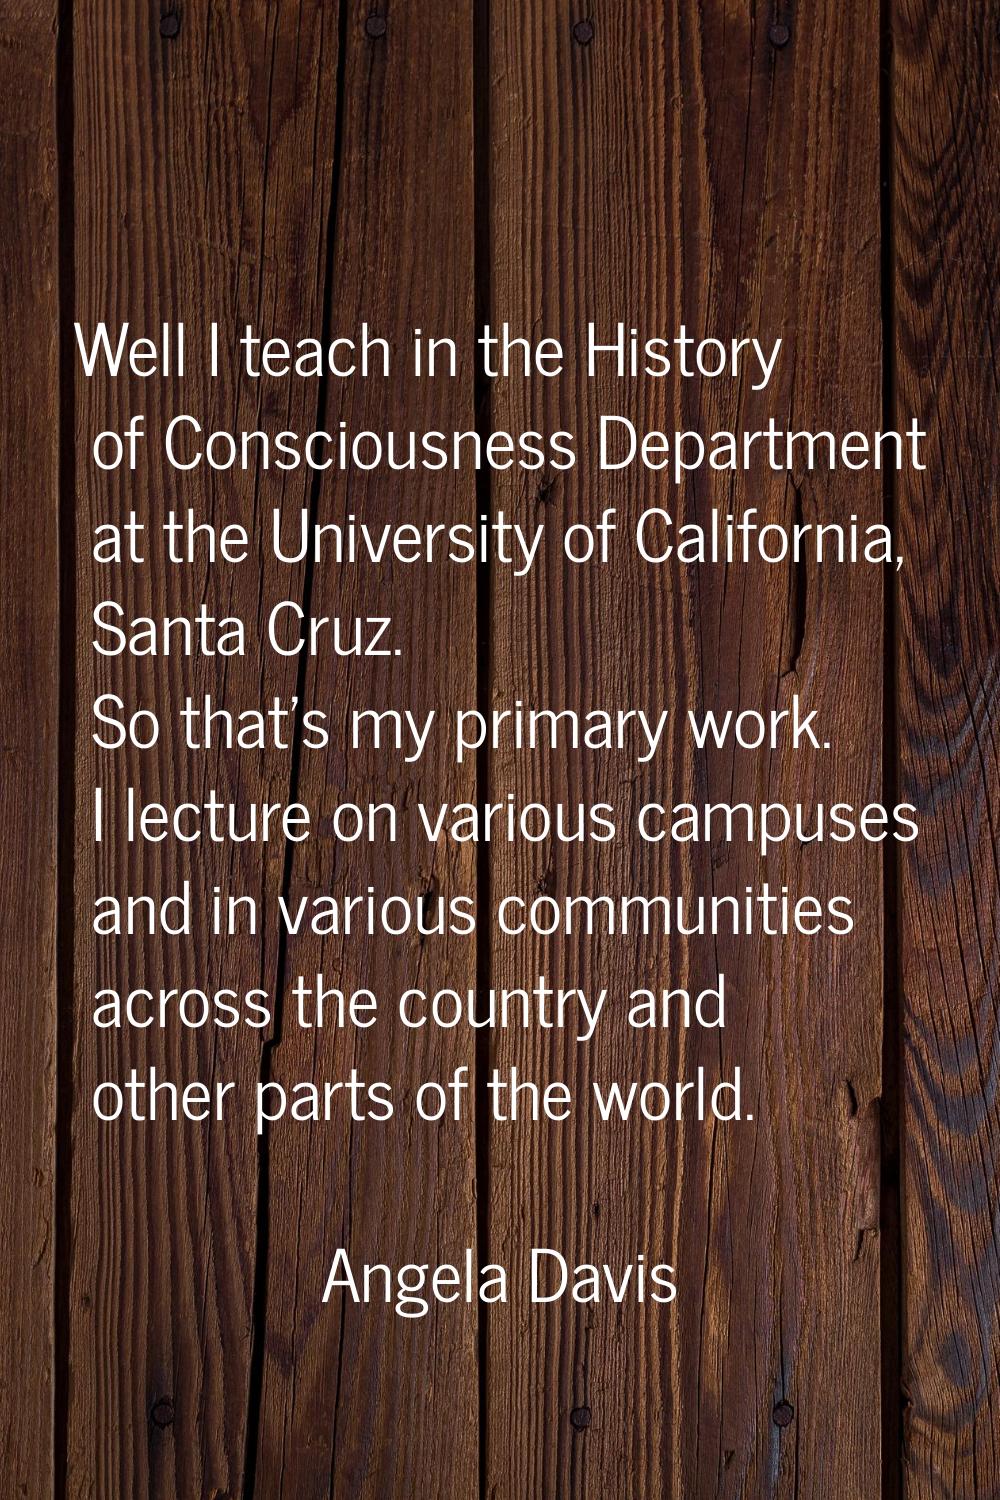 Well I teach in the History of Consciousness Department at the University of California, Santa Cruz